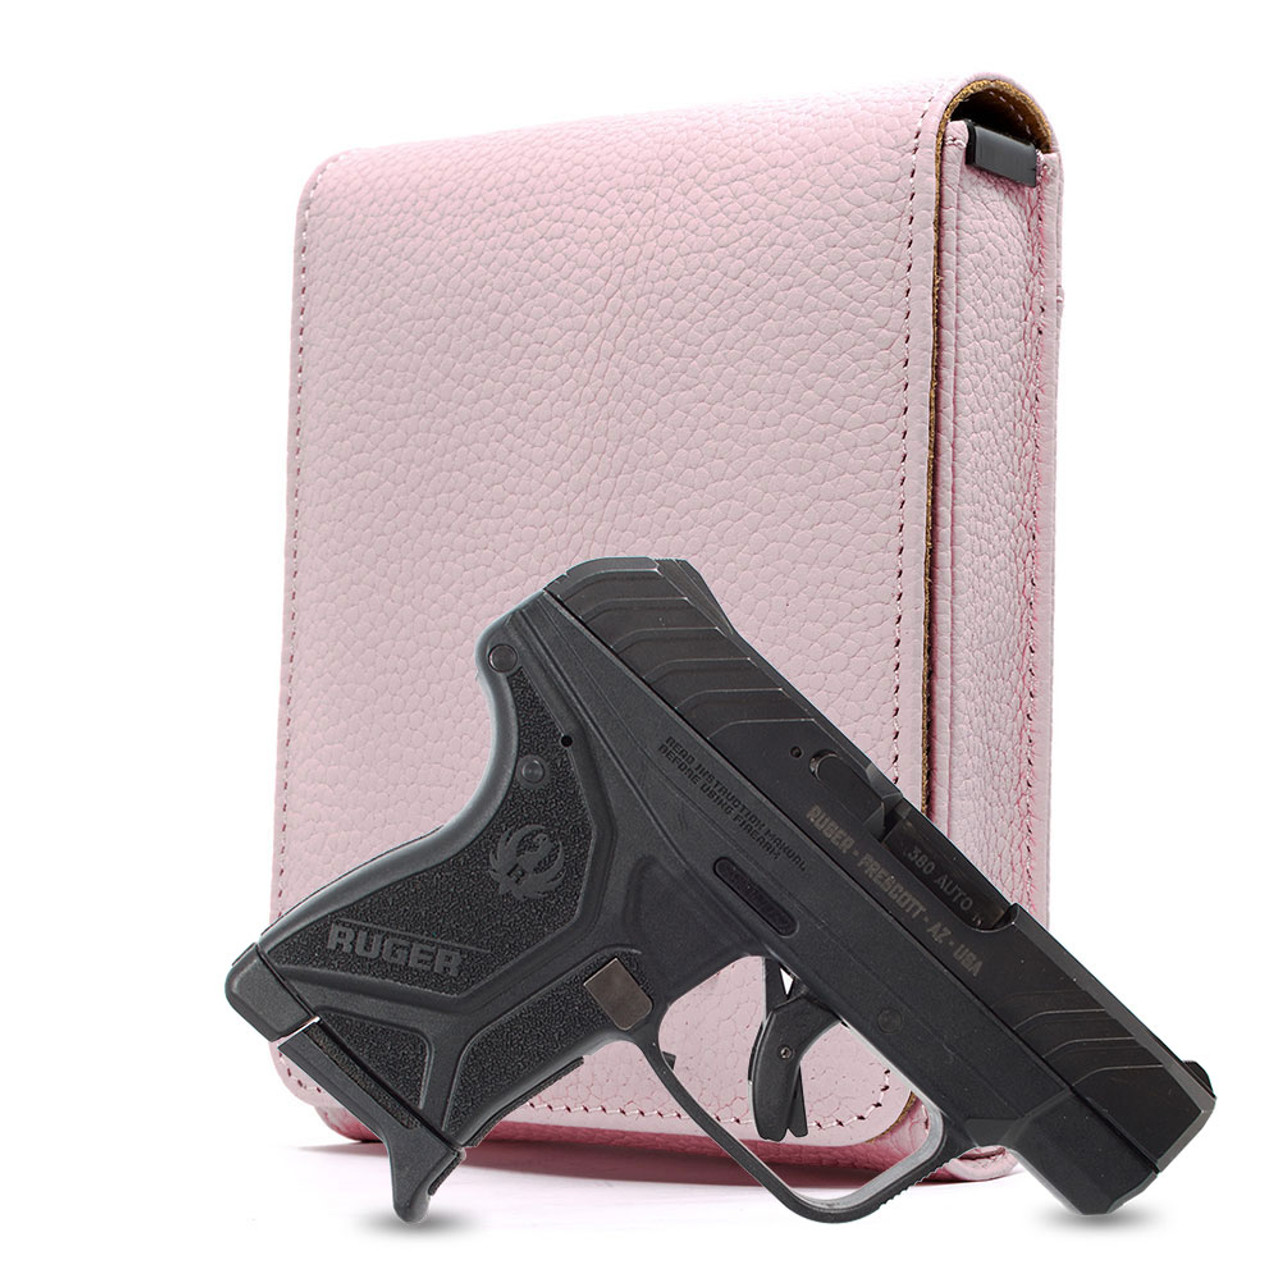 Ruger LCP II Pink Carry Faithfully Cross Holster